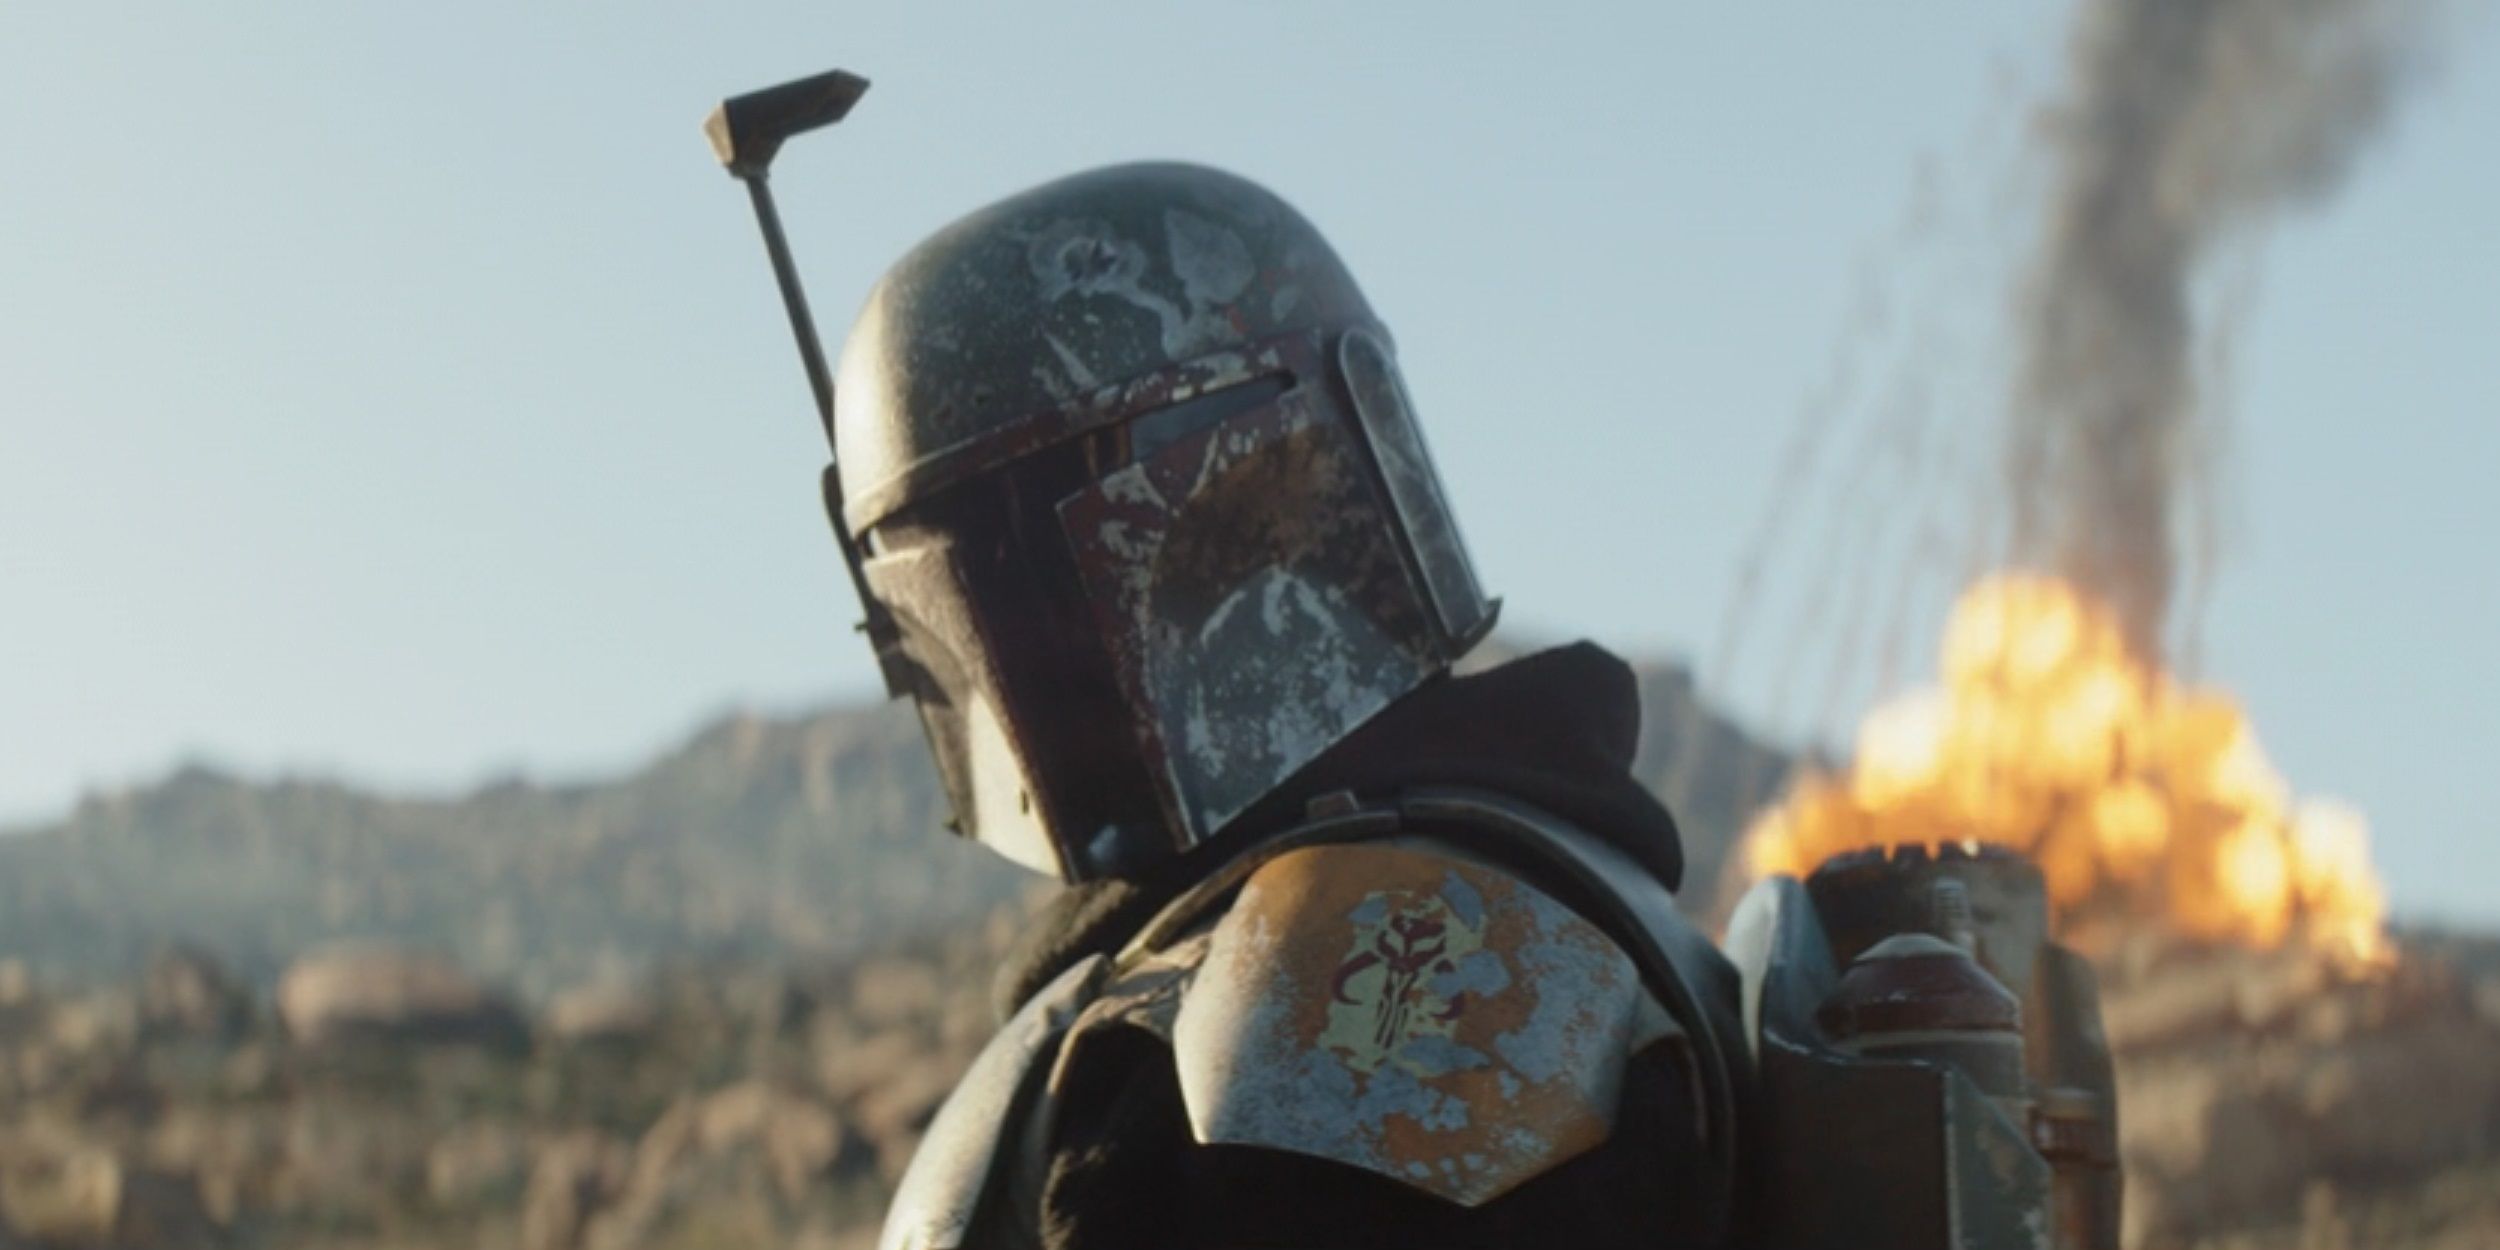 Boba Fett blows up two Imperial transports in The Mandalorian